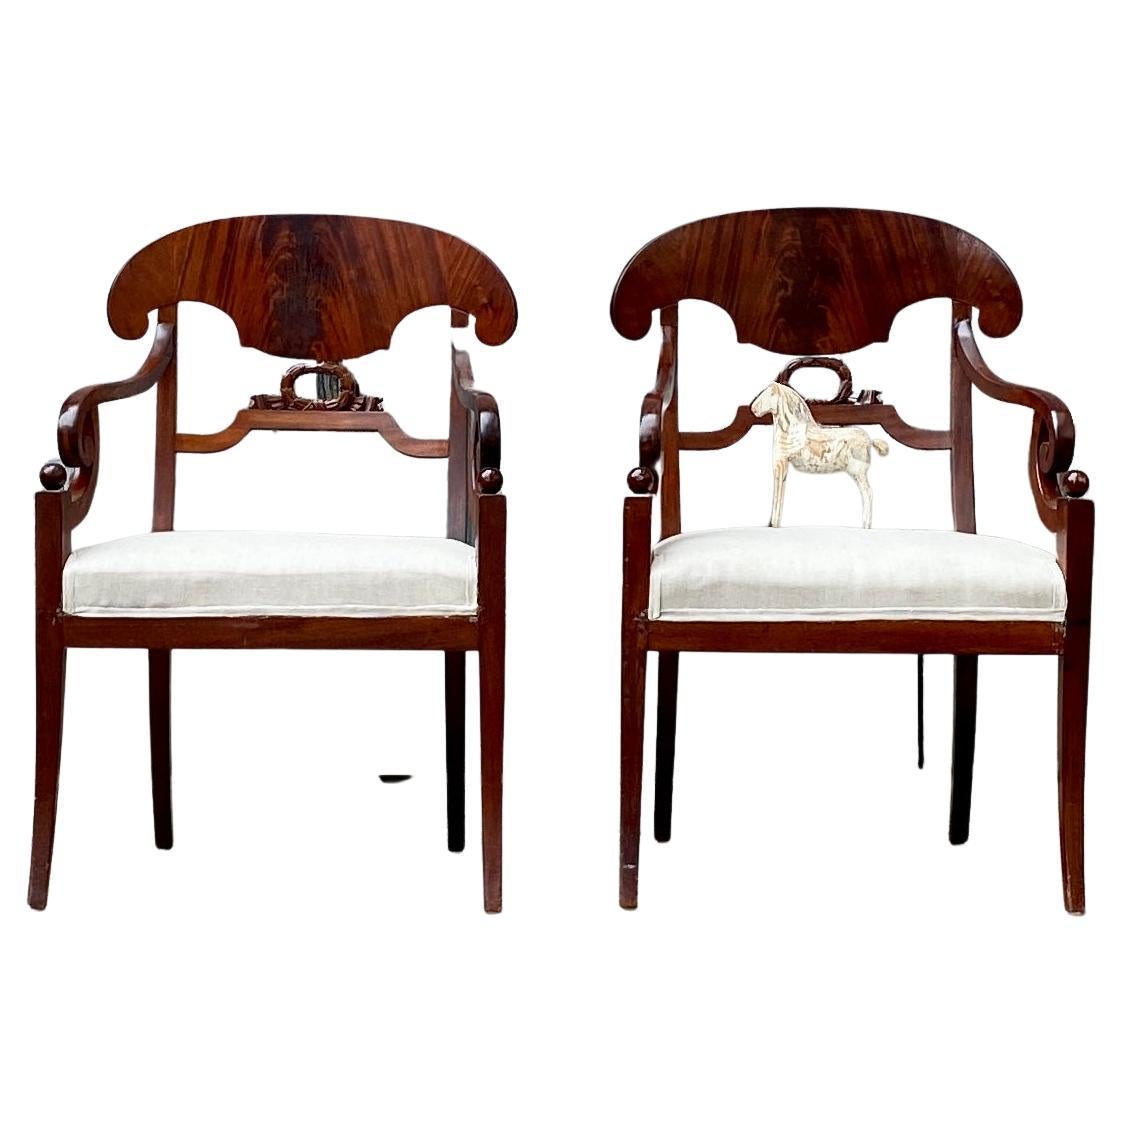 Pair of Stockholm Mahogany Armchairs in the Empire / Karl Johan period, circa 1810-1830 Sweden.
A pair of armchairs are veneered in a beautiful dark brown mahogany and are very classic designed with one carved center decoration. Slight sabre front